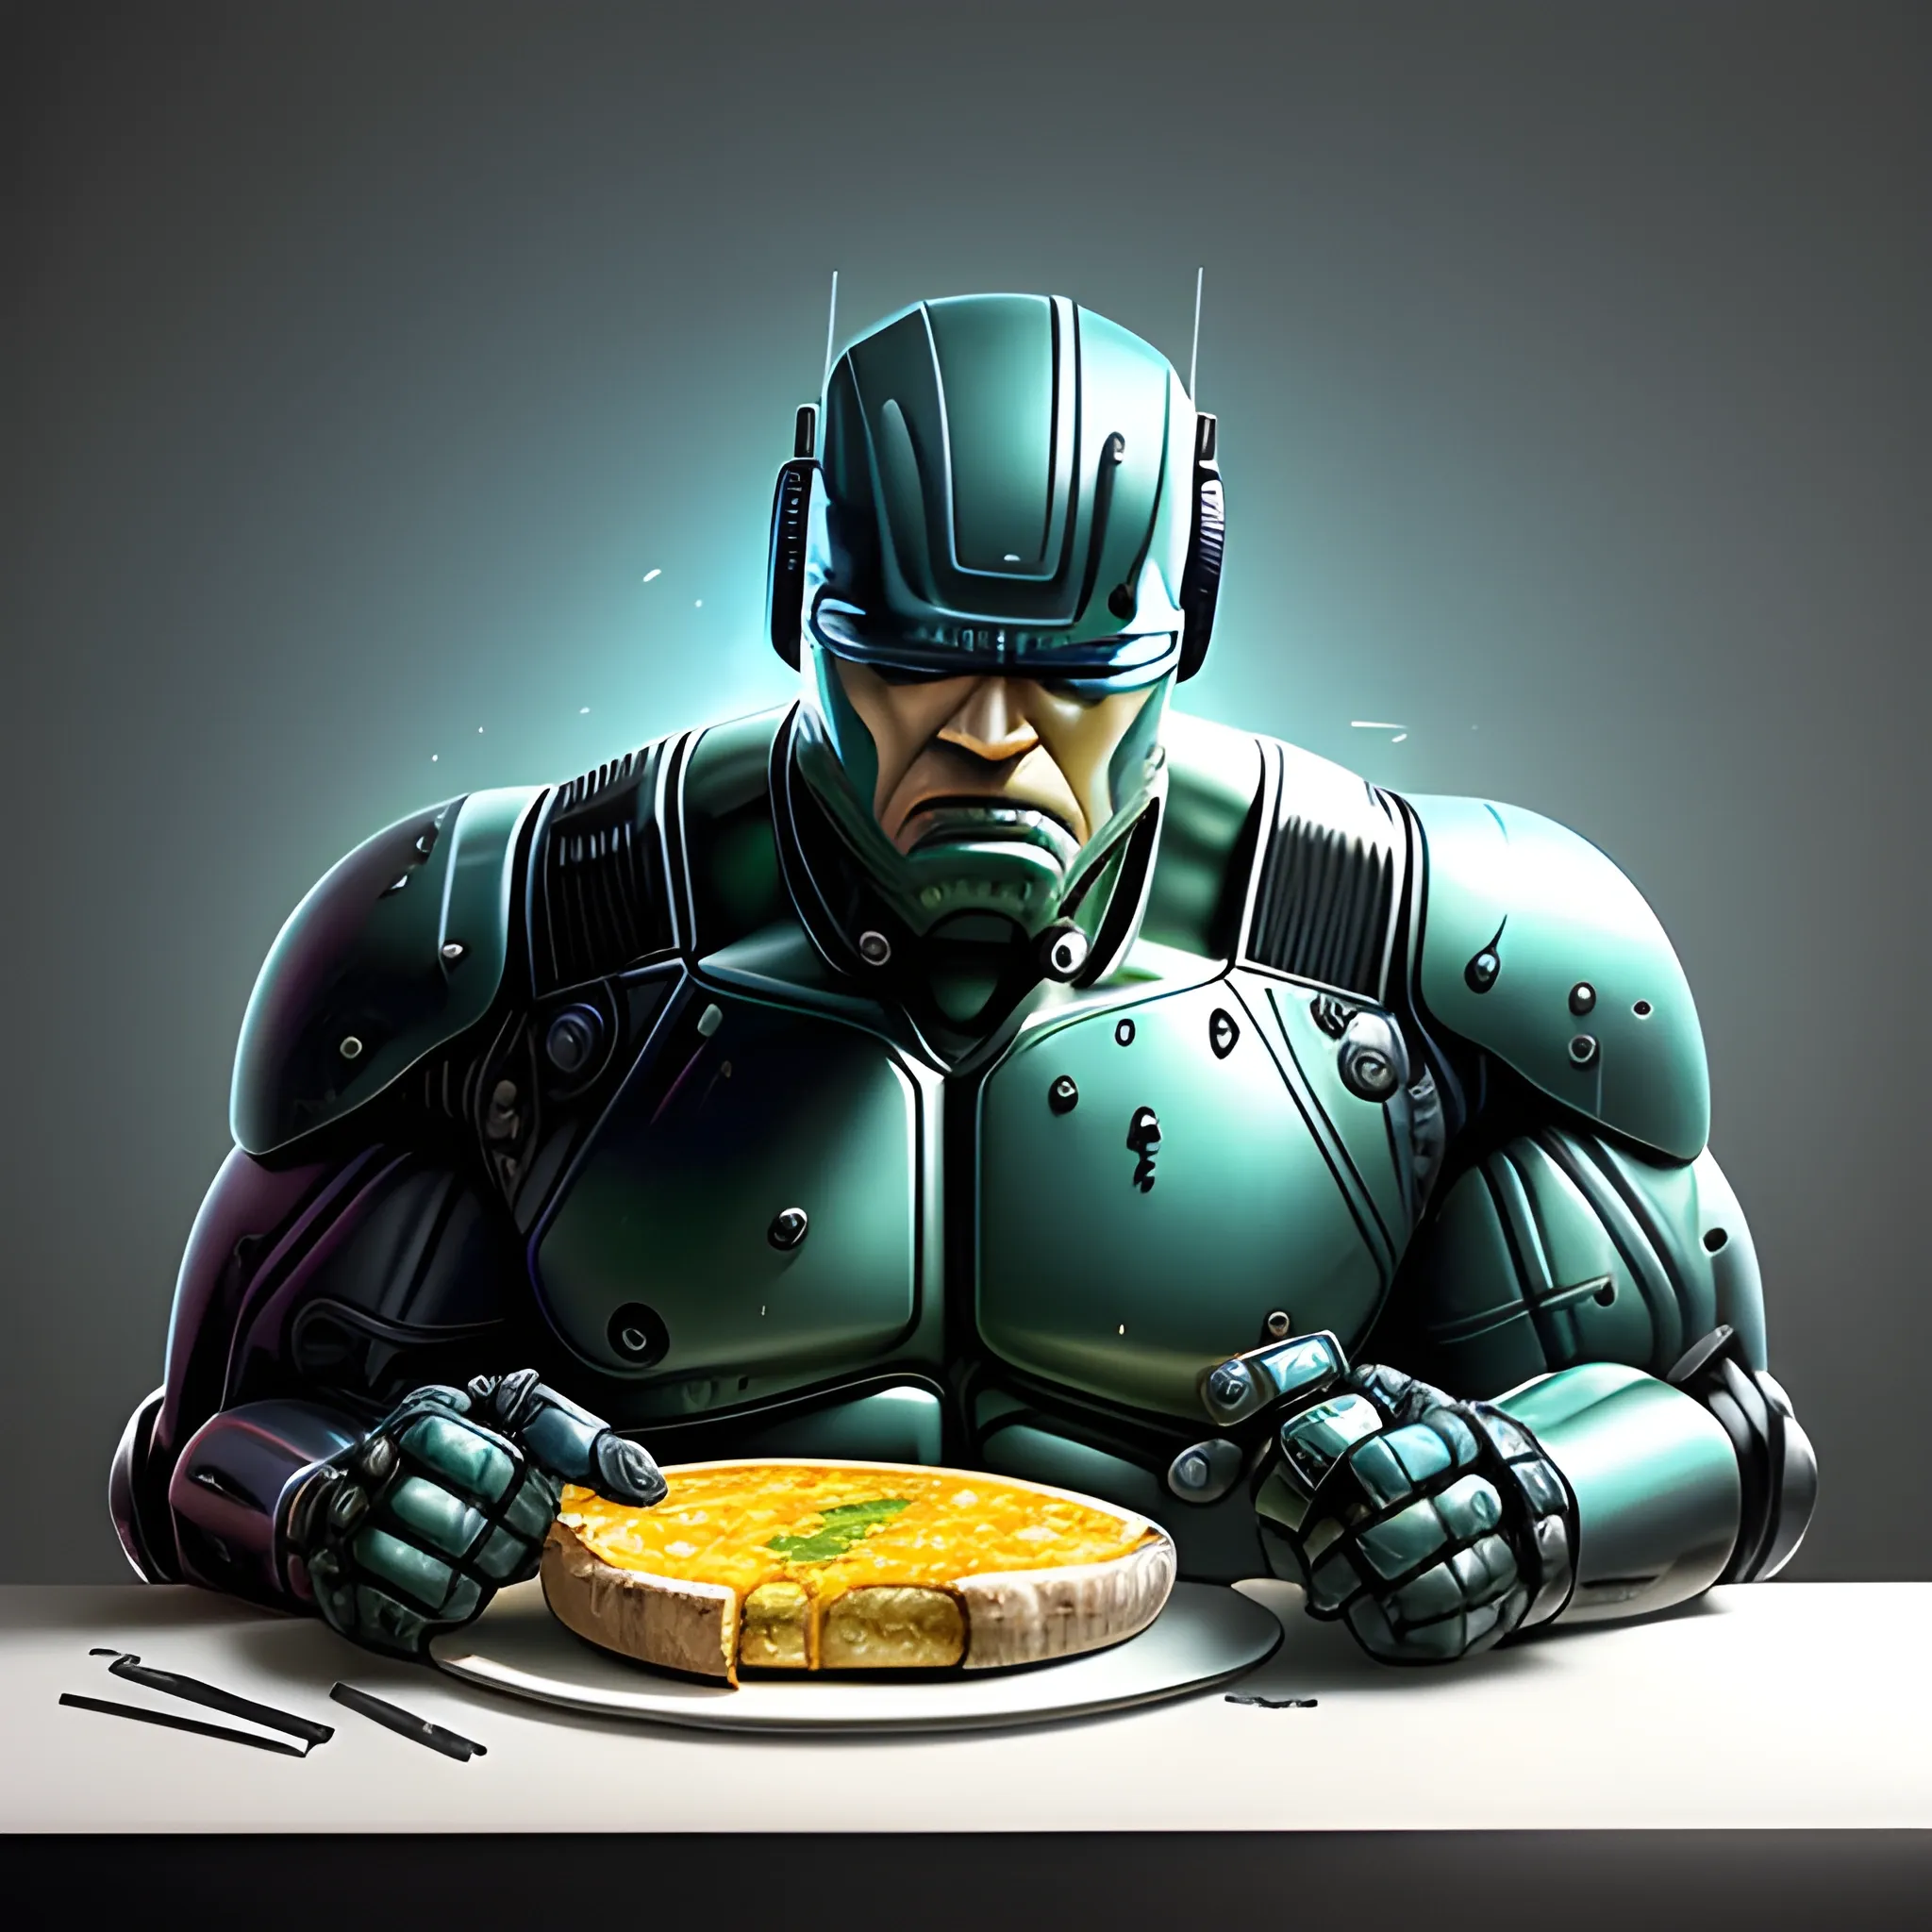 Hulk, with subtle cybernetic enhancements, holding and eating a single slice of pizza with dripping melted cheese. The cheese should be visibly dripping from the slice, not from Hulk's mouth. The image should be hyper-realistic, illuminated with soft studio lighting and edge highlights. The background should be beautifully detailed, drawing inspiration from a luxurious cyberpunk setting, reminiscent of Robocop. Ensure the image is in 4k resolution.